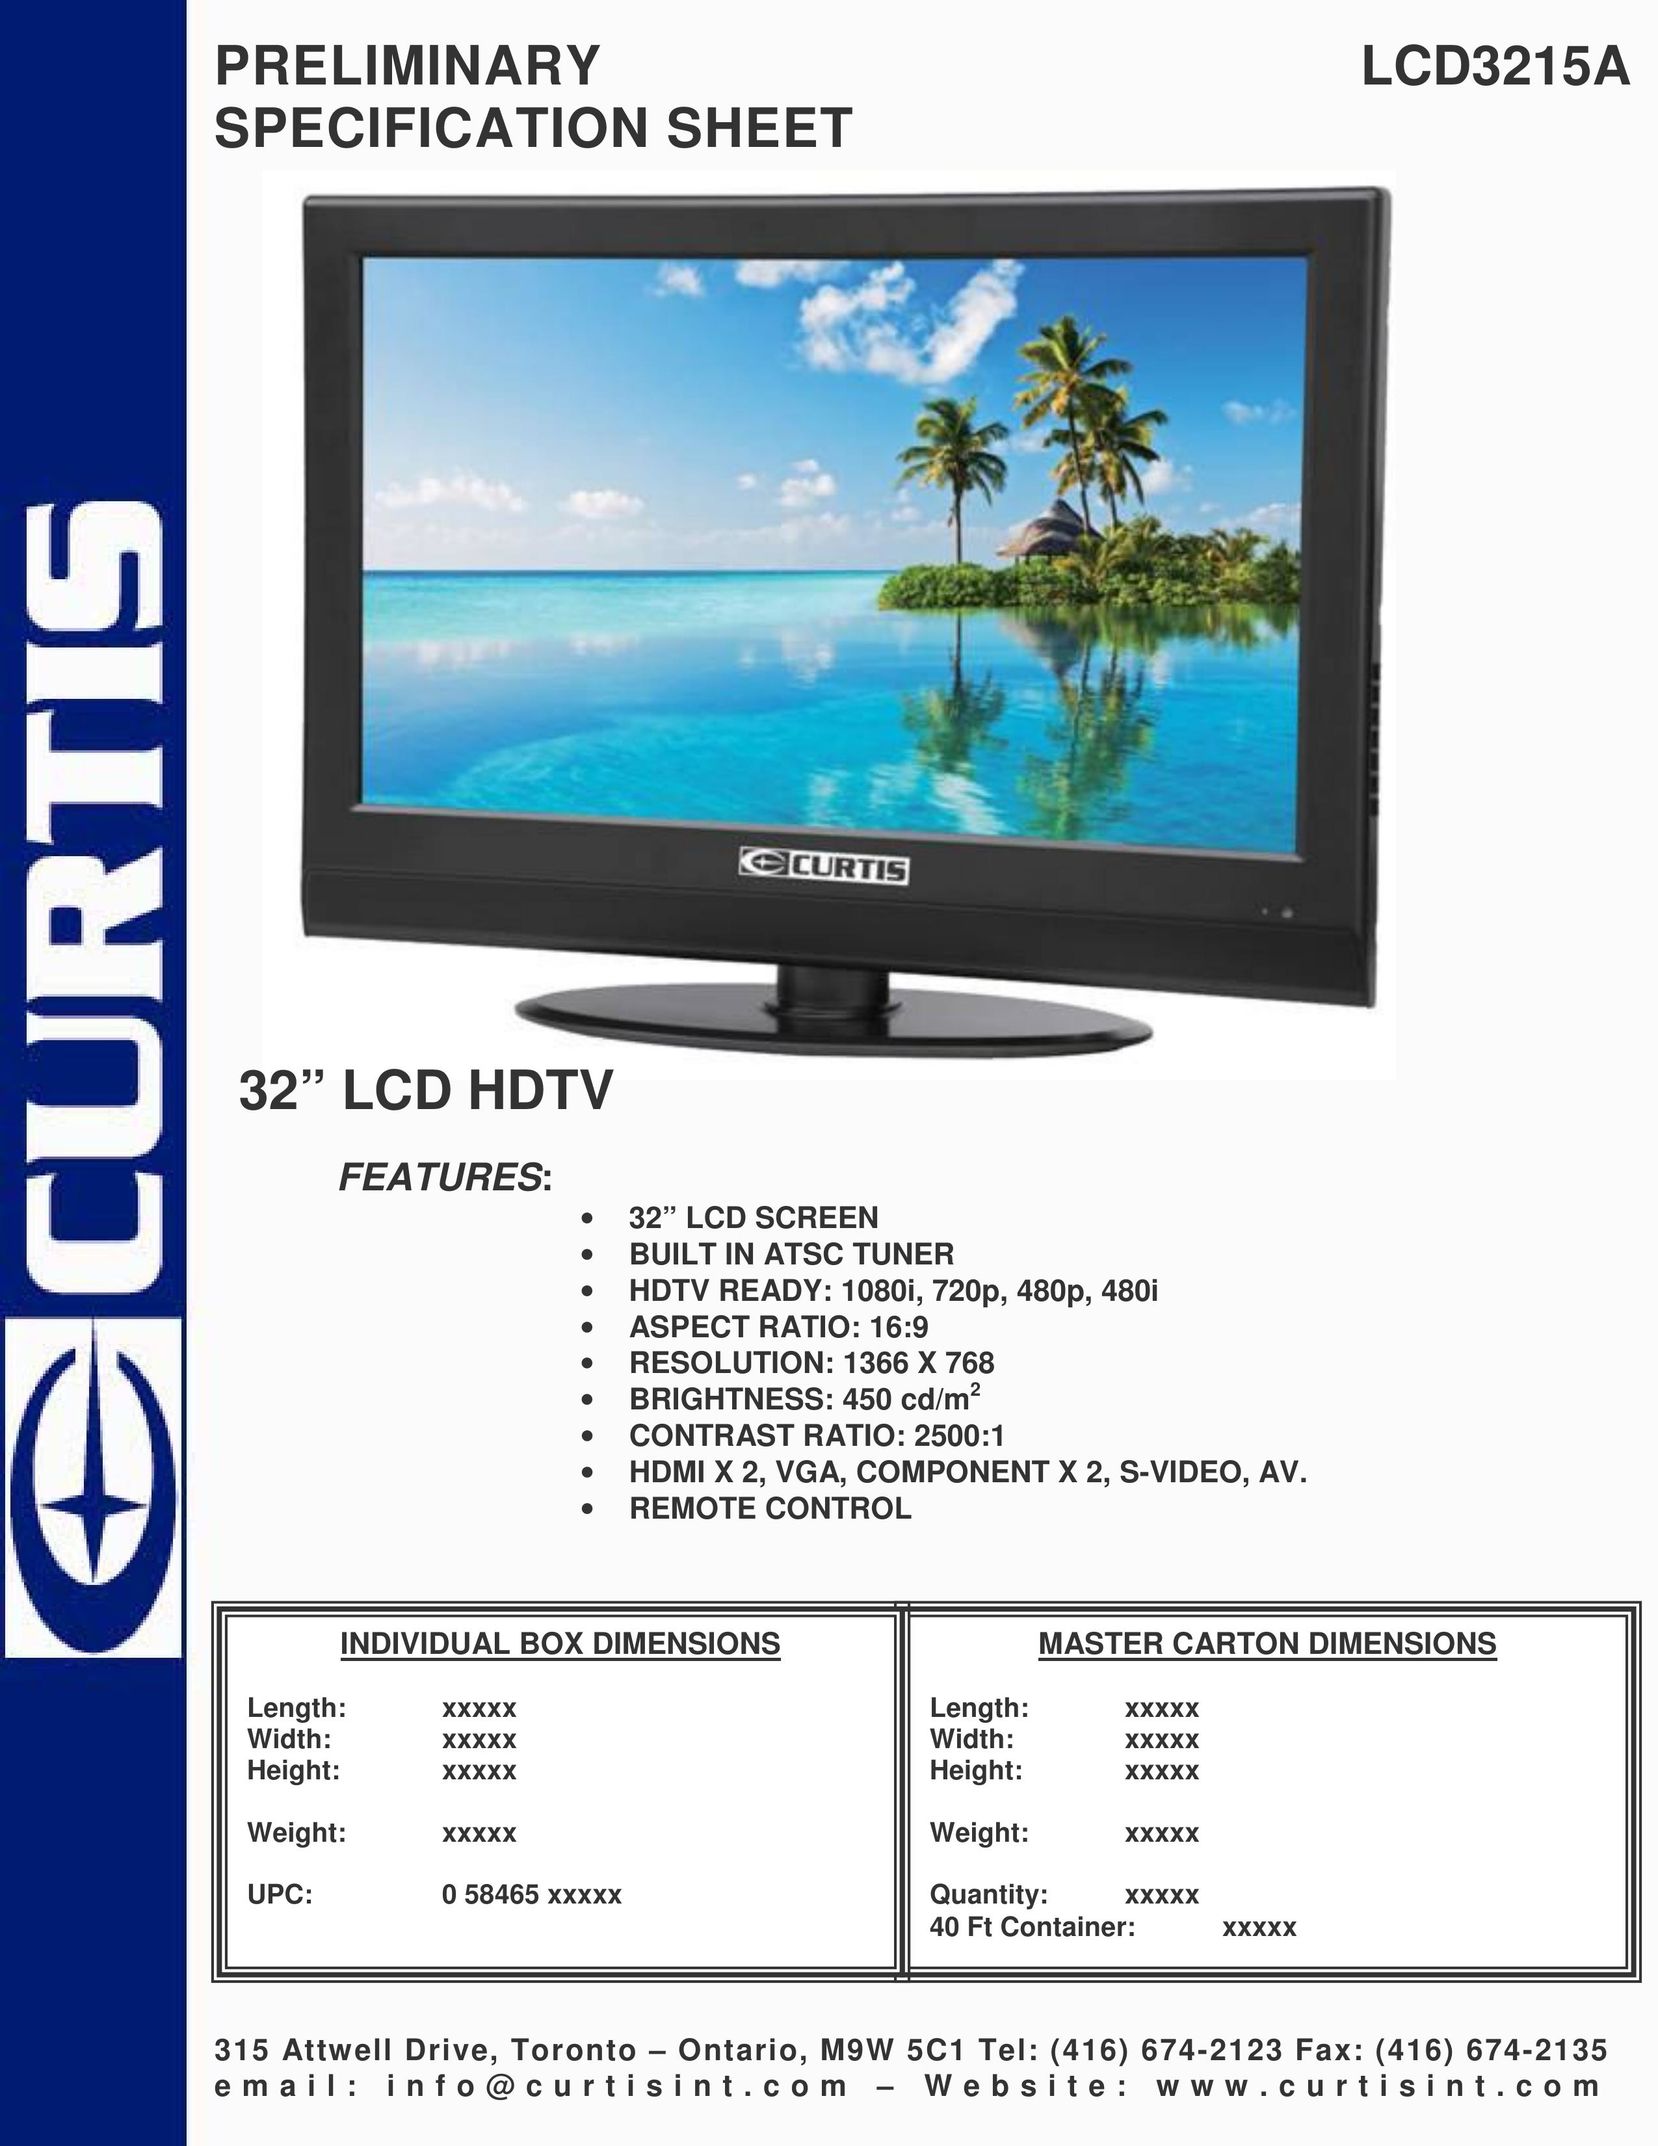 Curtis LCD3215A Flat Panel Television User Manual